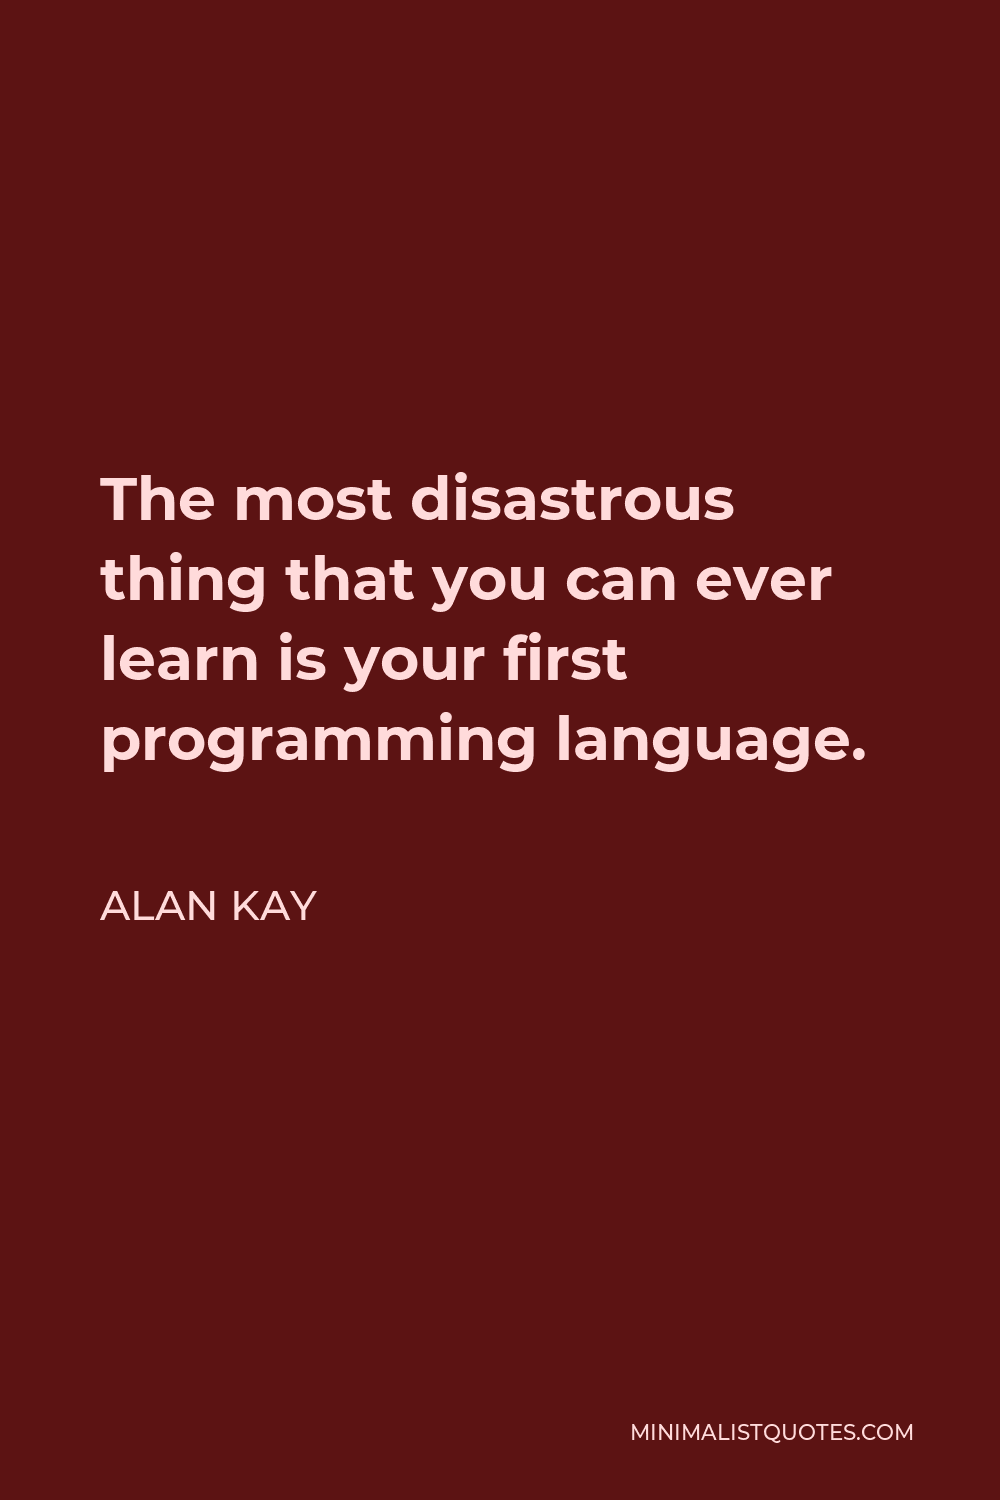 Alan Kay Quote - The most disastrous thing that you can ever learn is your first programming language.